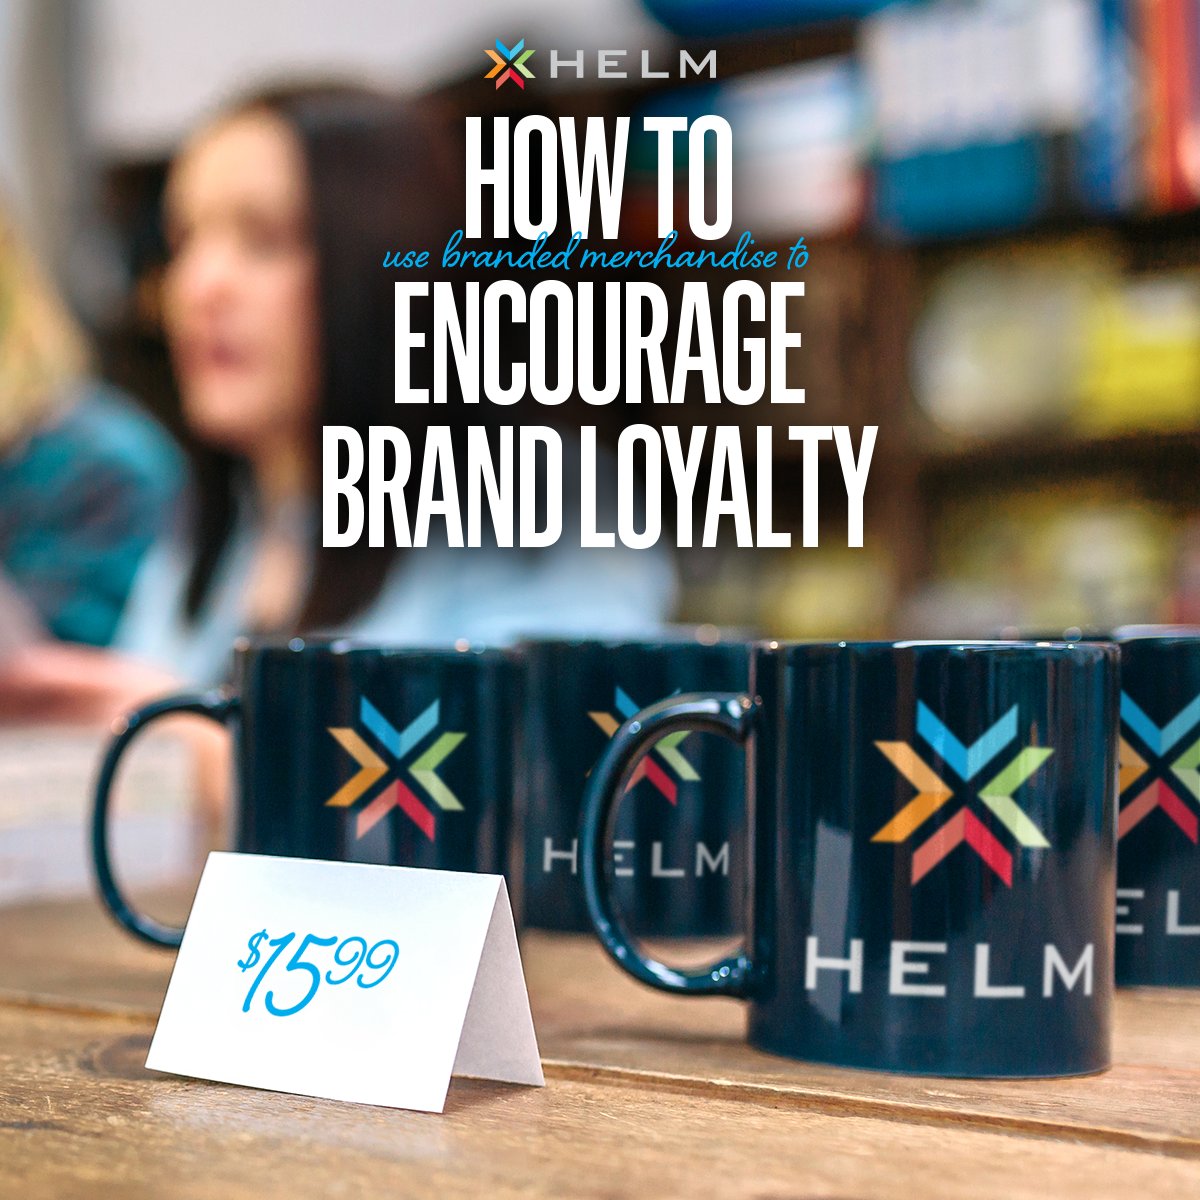 Transform your customers into brand enthusiasts by using #brandedmerchandise to build customer and #brandloyalty through “#giftswithpurchase”, #giveaways, and in-store displays. Click through to our latest blog post to learn more: lnkd.in/eG4aXRND.

#Helm #BrandMarketing